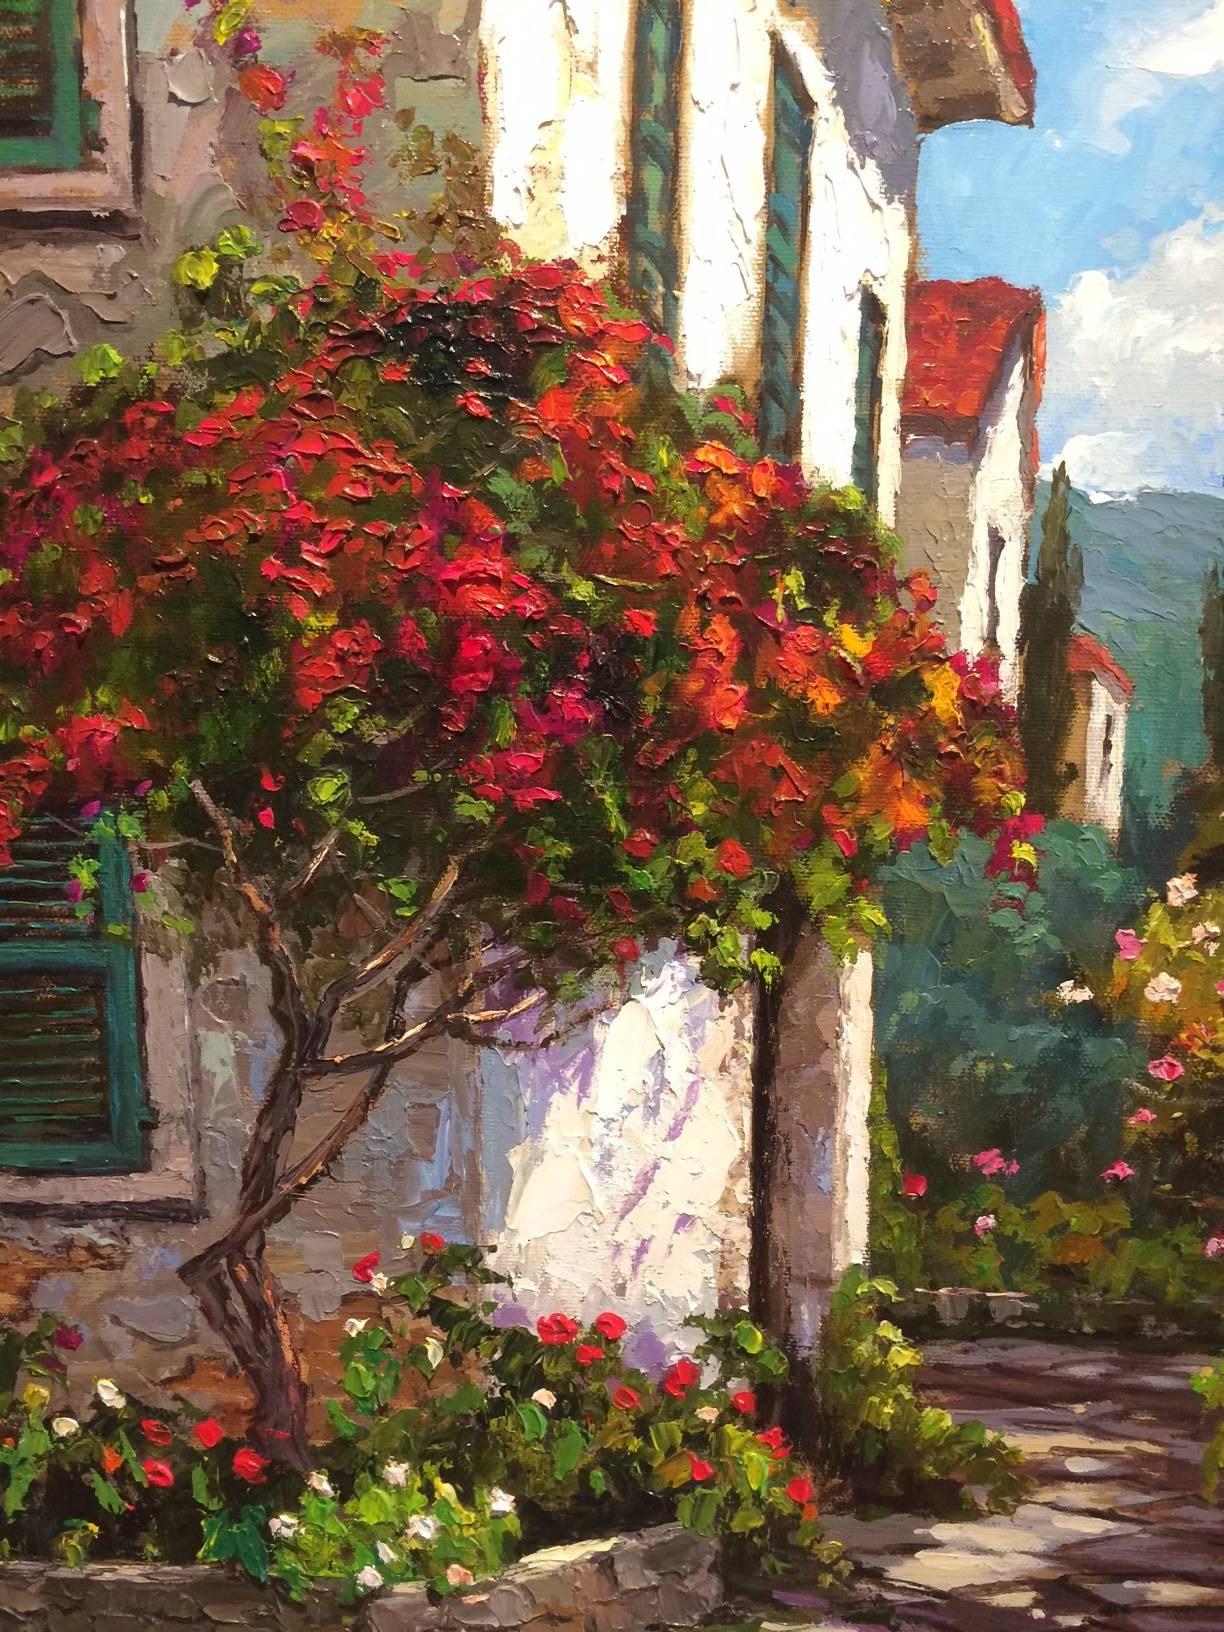 Garden Path - Italy - Painting by William Rengifo